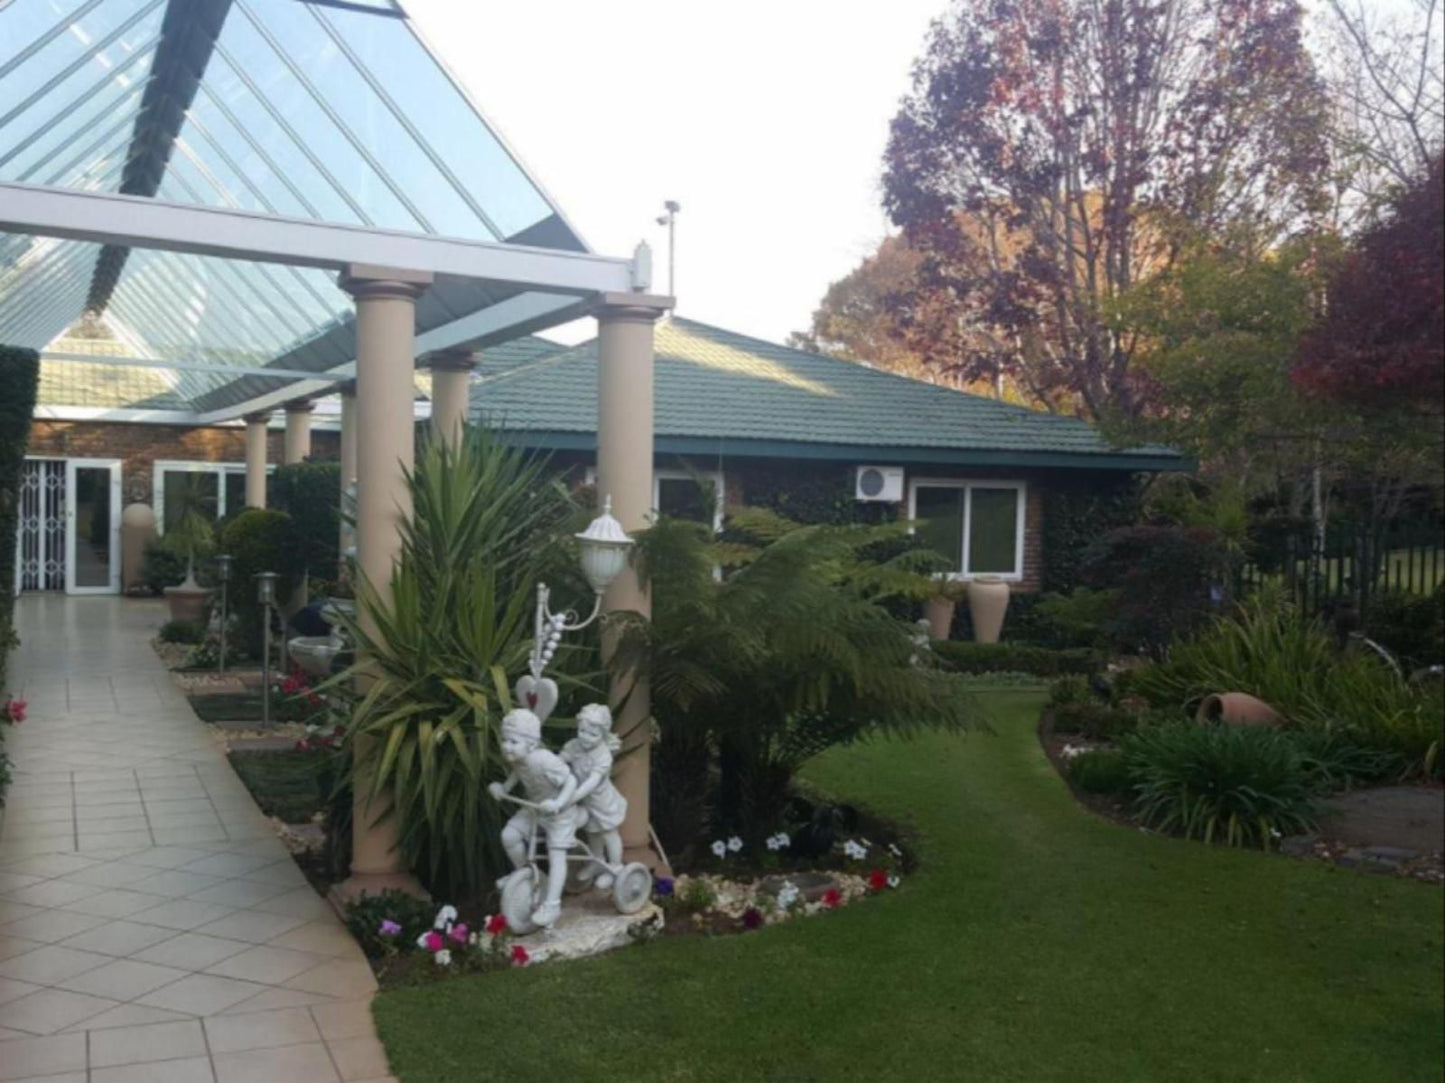 Sunrise Serenity Guest House Lydenburg Mpumalanga South Africa House, Building, Architecture, Palm Tree, Plant, Nature, Wood, Pavilion, Garden